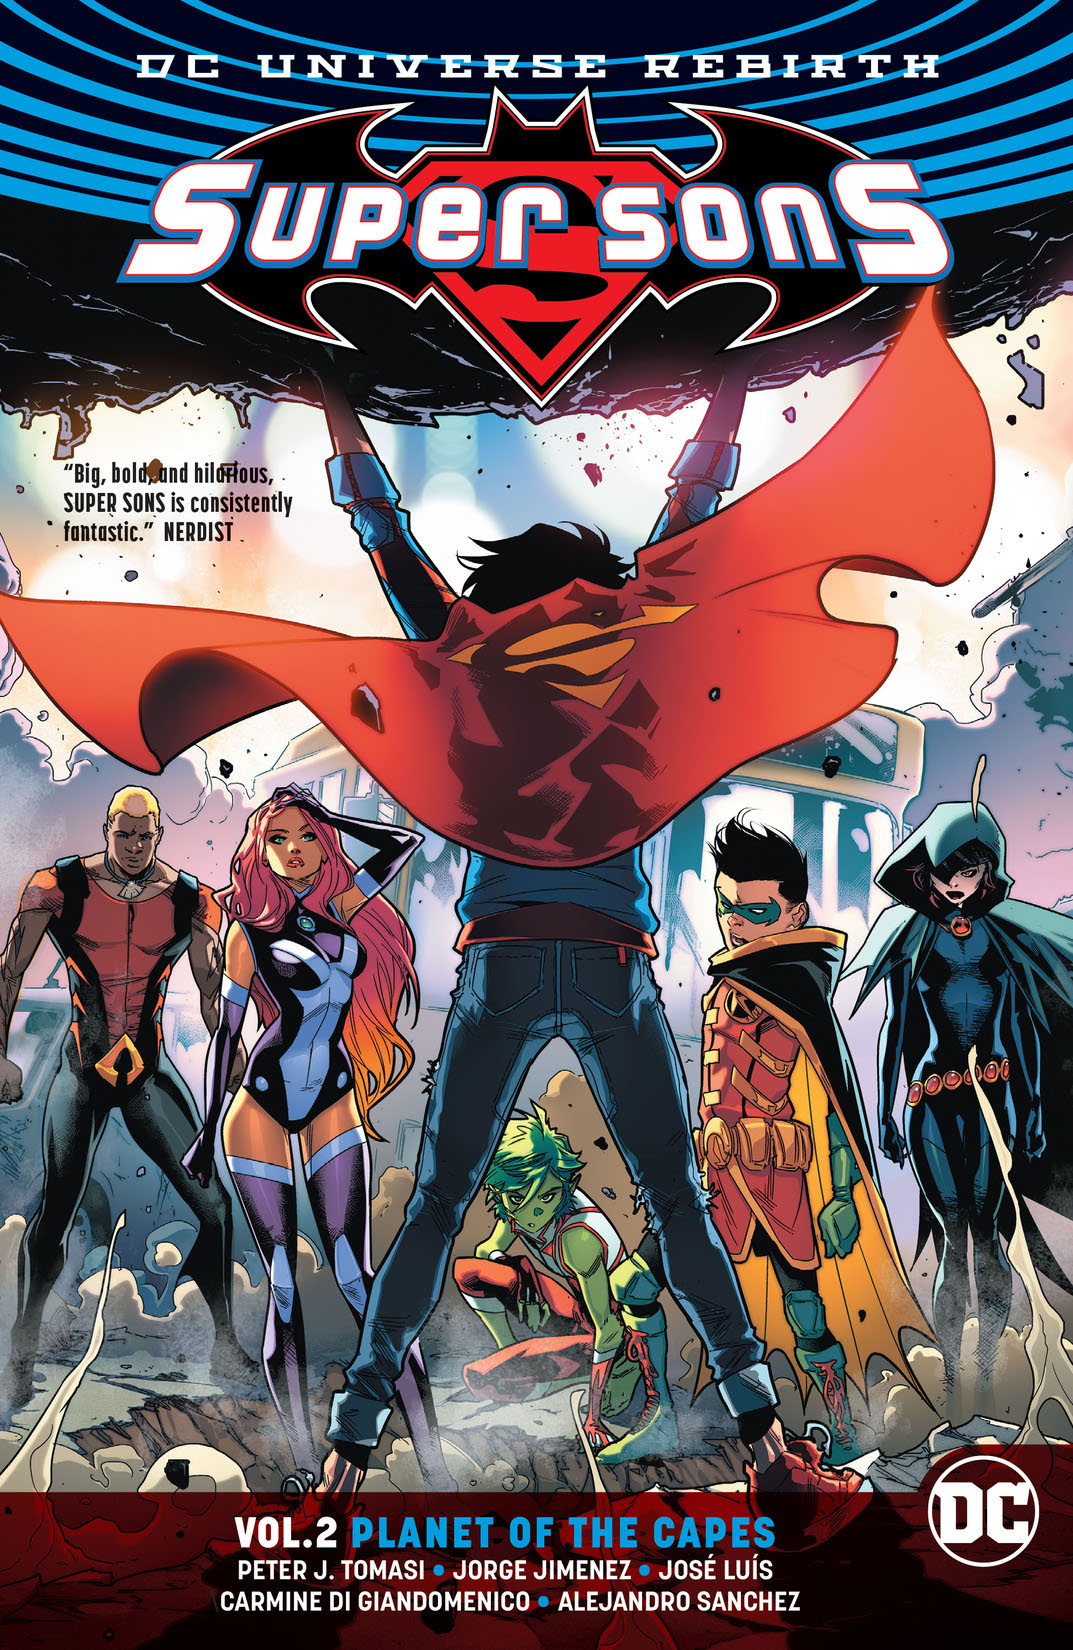 Super Sons Vol. 2: Planet of the Capes (Rebirth) preview images